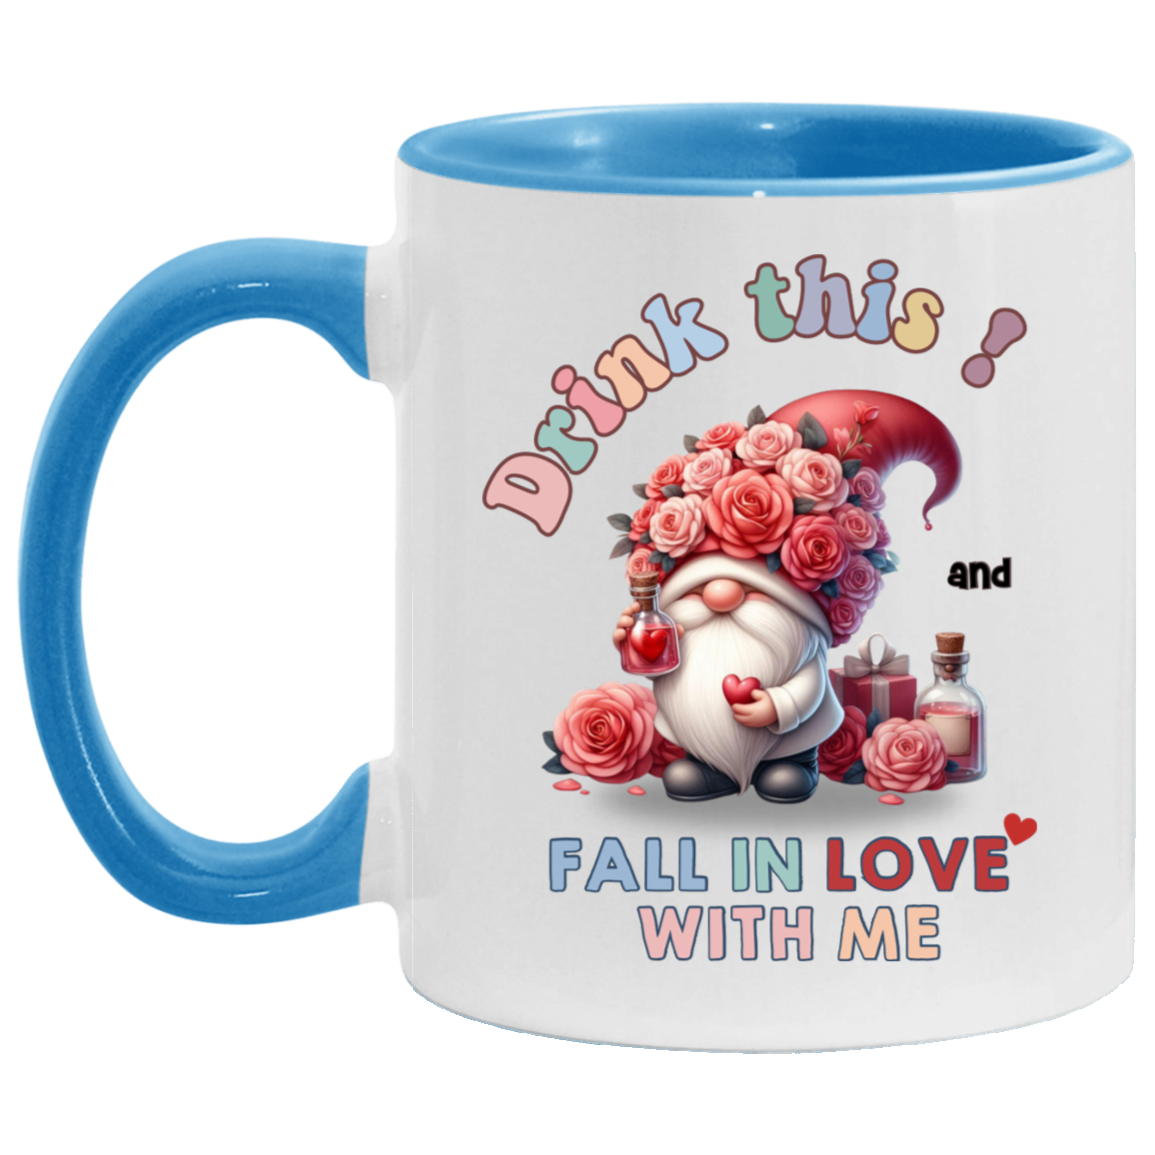 Drink this Love Potion Accent Mug